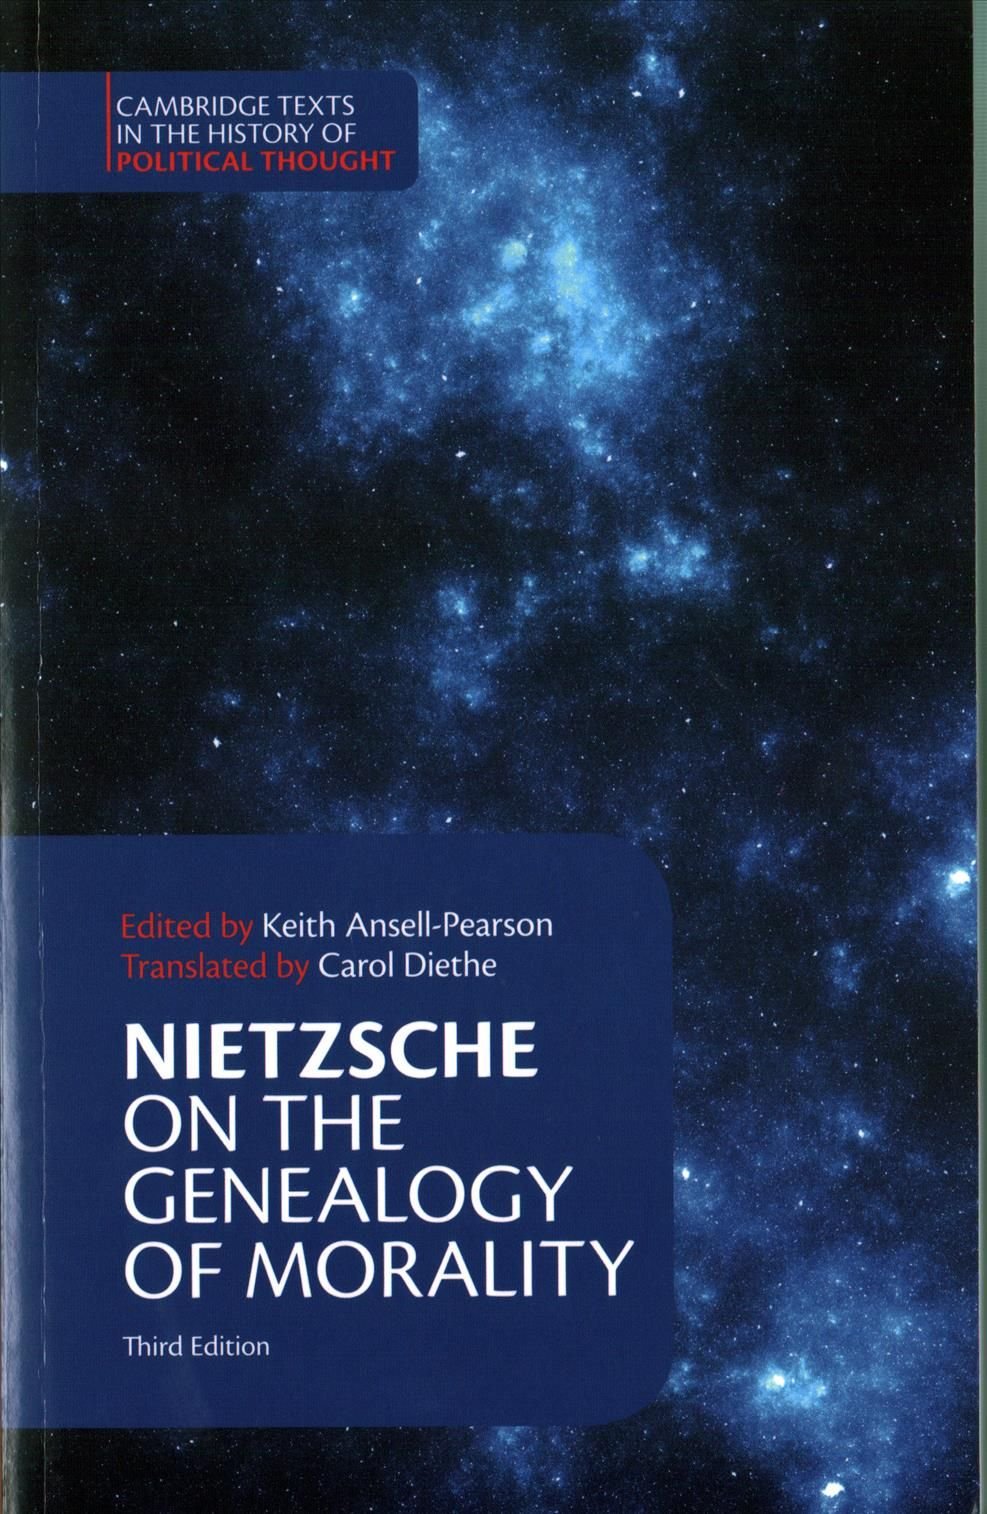 Free　Genealogy　On　the　With　and　Other　Nietzsche:　Nietzsche　Morality　Friedrich　Delivery　Writings　of　Buy　by